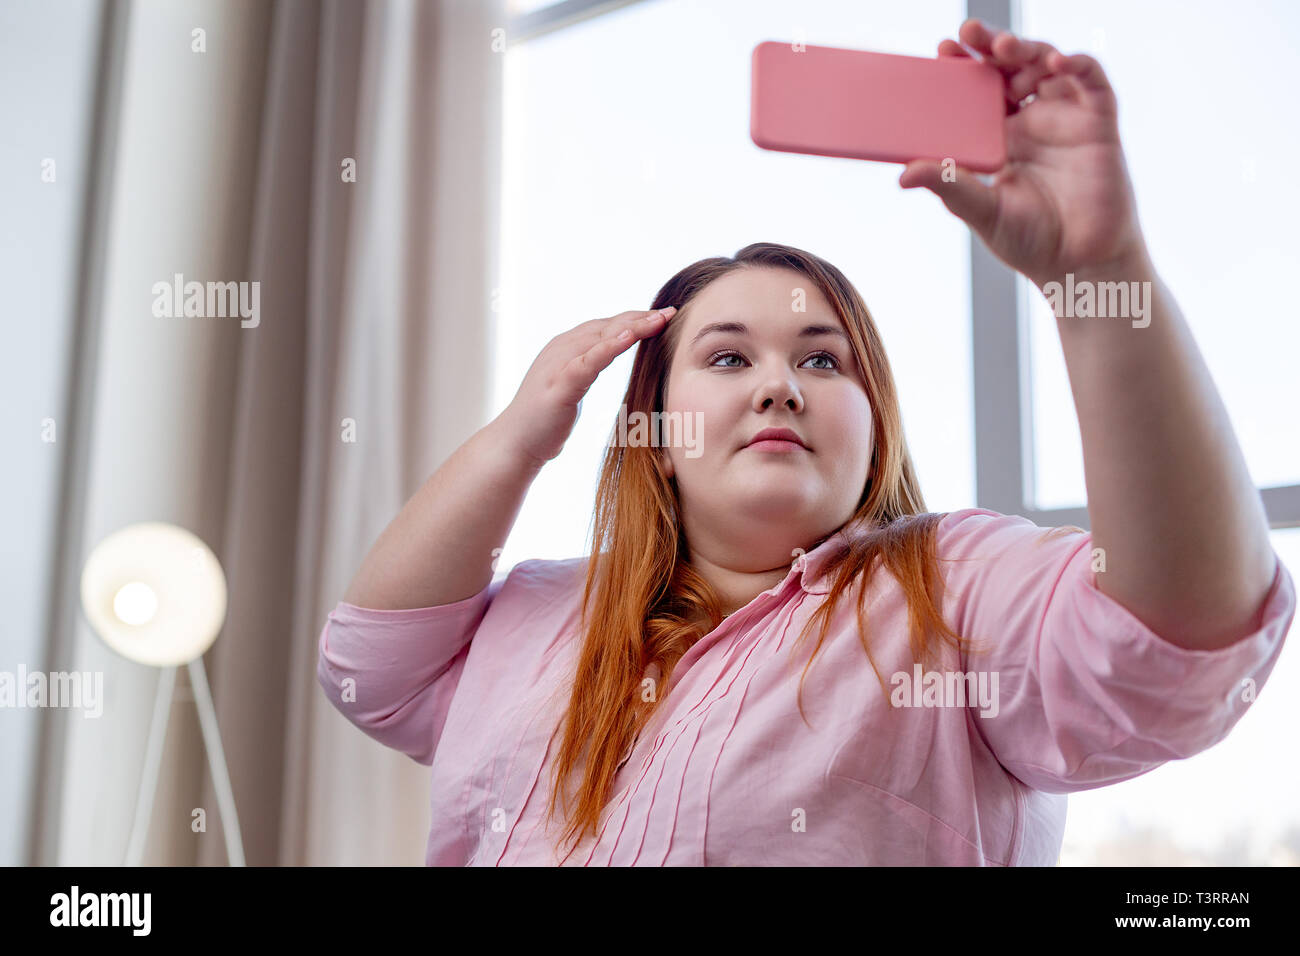 Pleasant overweight woman wanting to look pretty Stock Photo